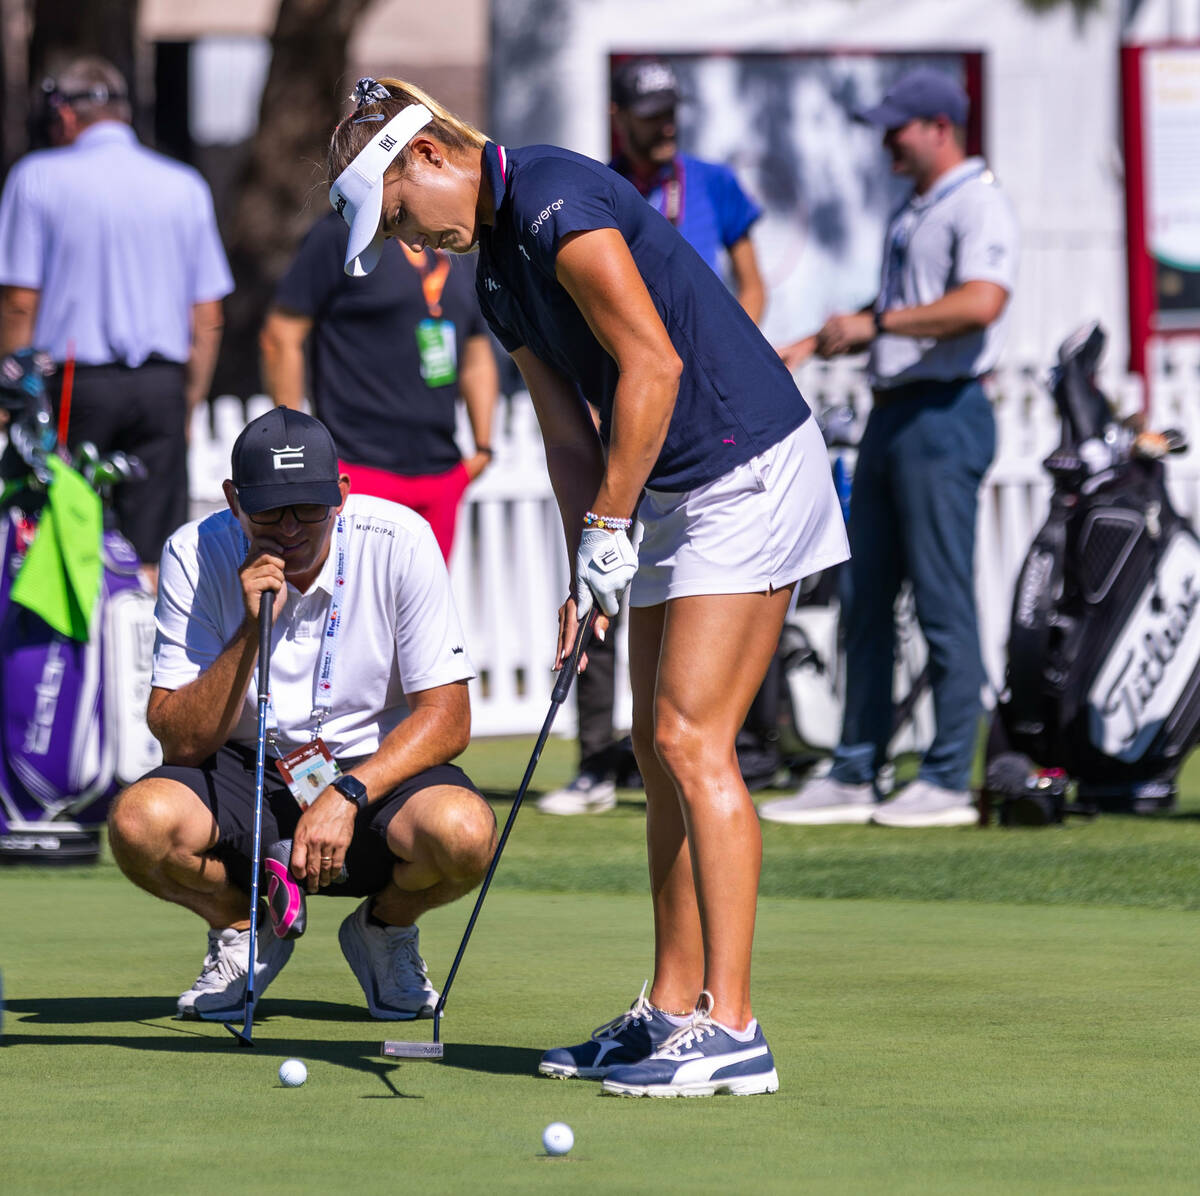 Lexi Thompson takes putting practice as she will be the seventh woman to play in a PGA Tour eve ...